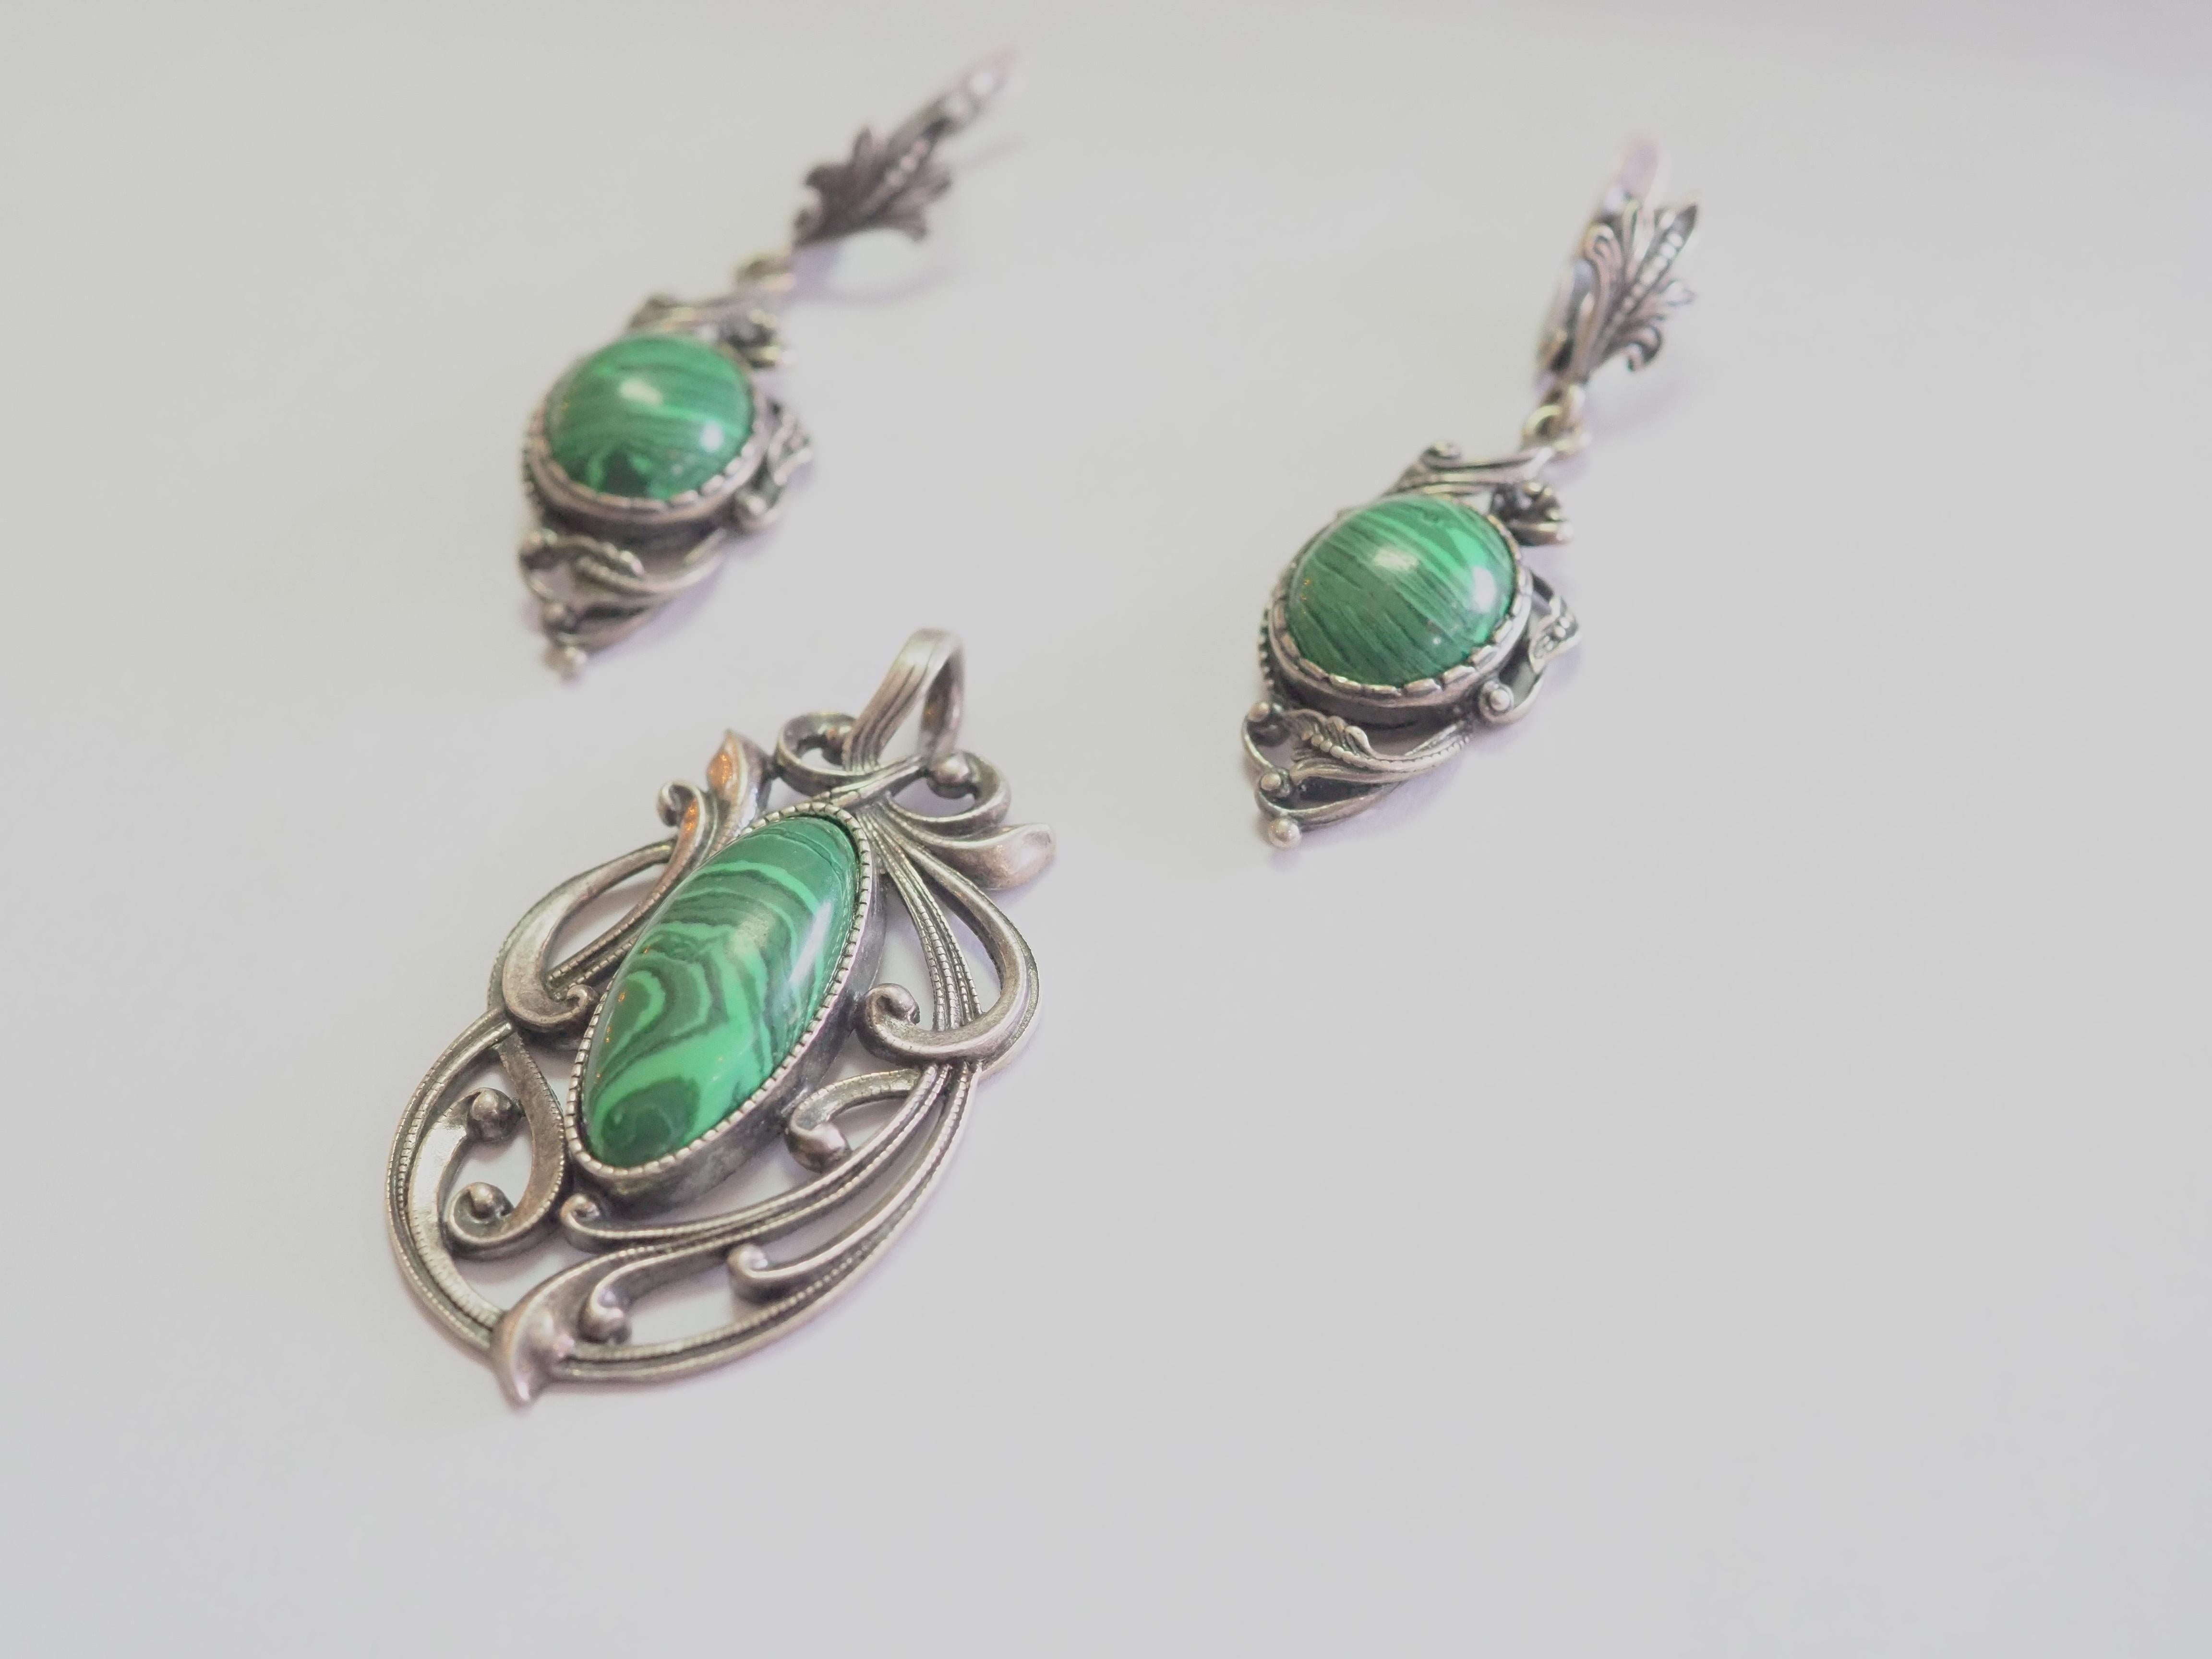 A very beautiful and delicate pendant and earring in sterling silver for both wearing everyday and for formal wearing. The pendant includes a gorgeous and flawless cabochon malachite stone arranged and inlaid masterfully. The long dangle earrings